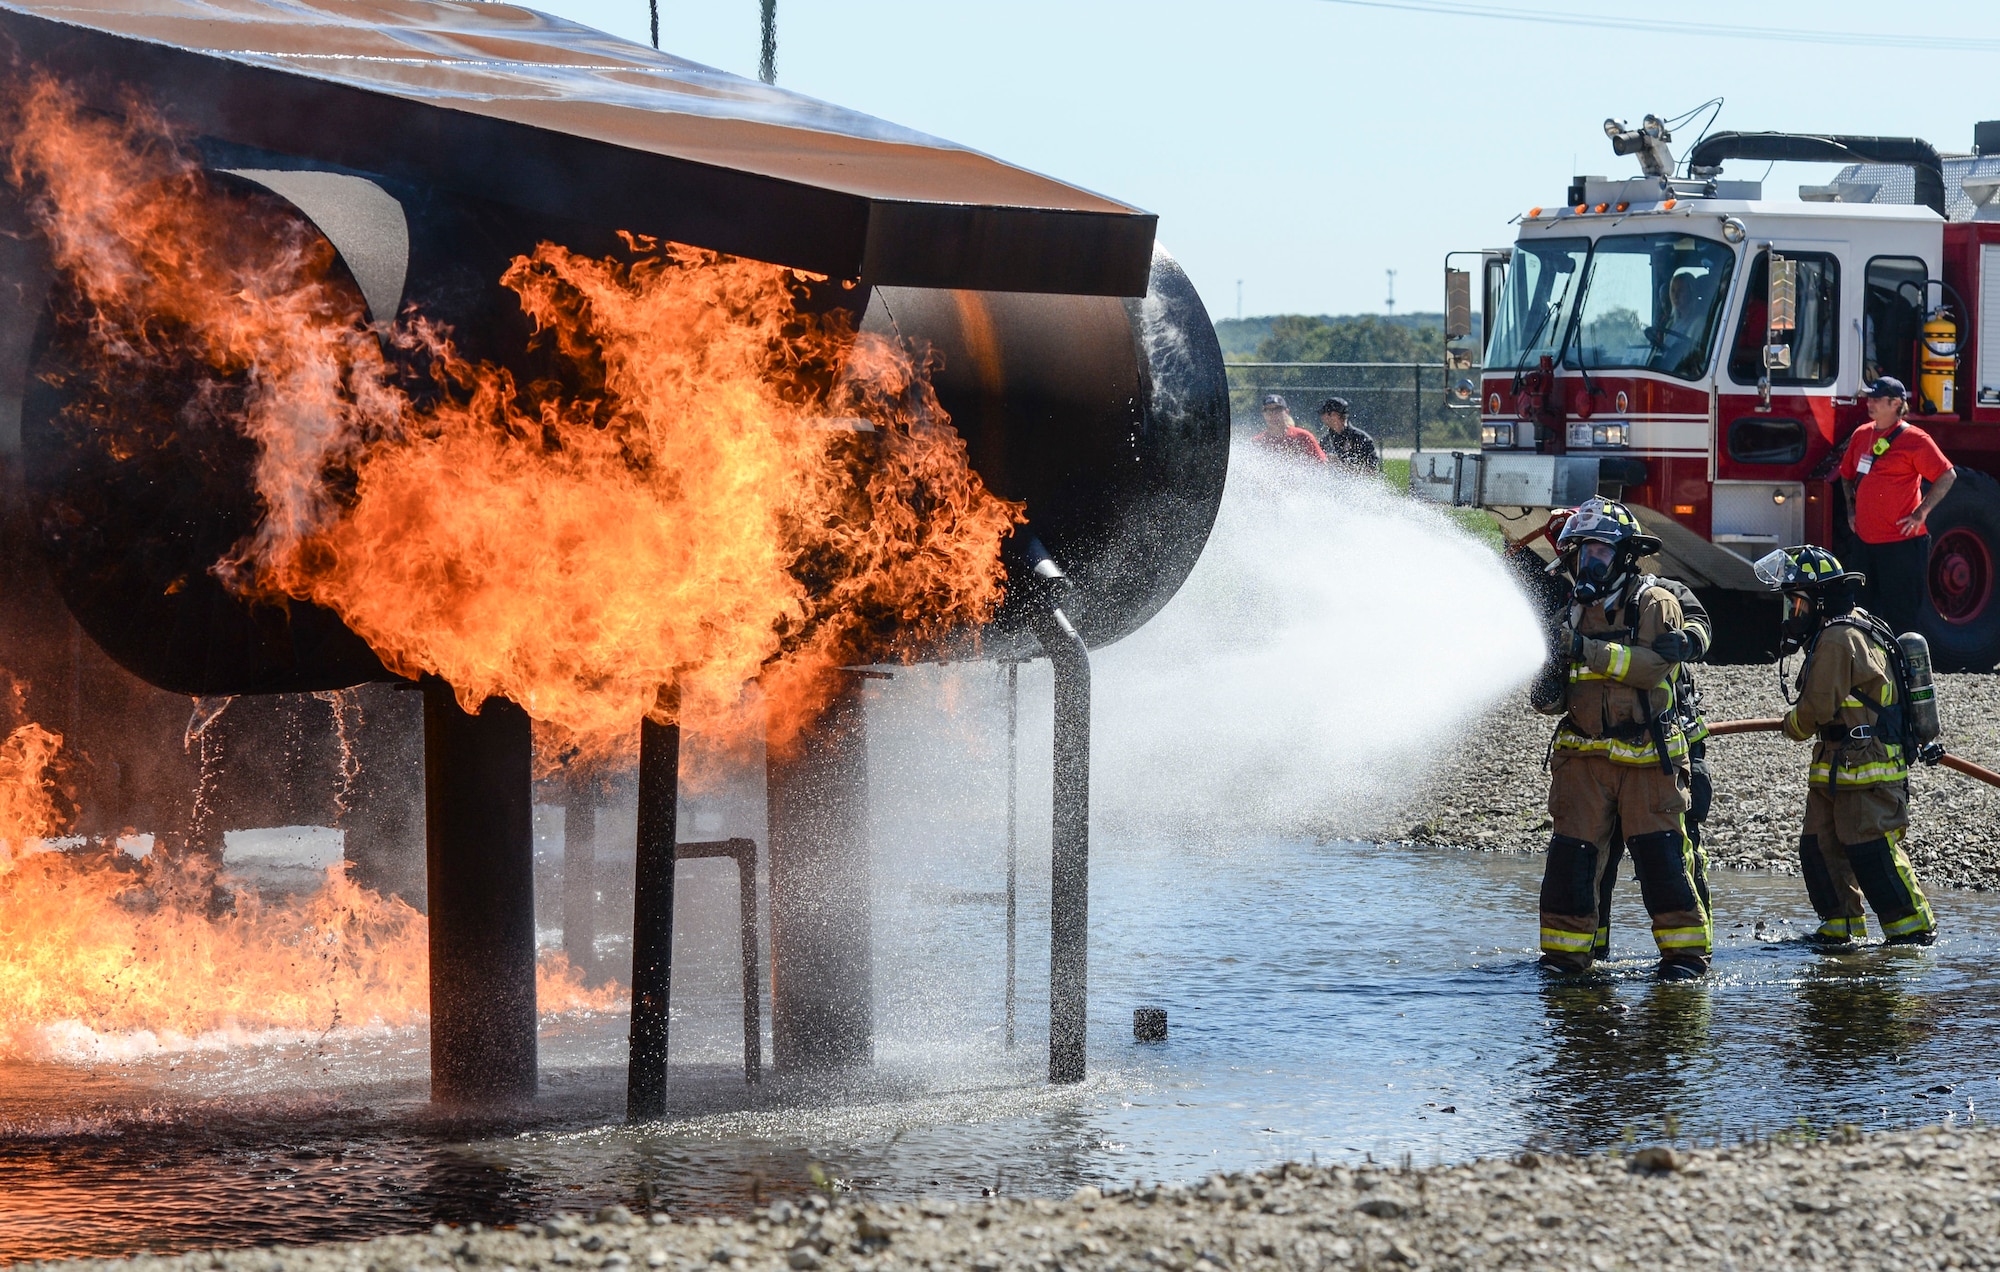 Fire Ops 101 event at Wright-Patterson Air Force Base